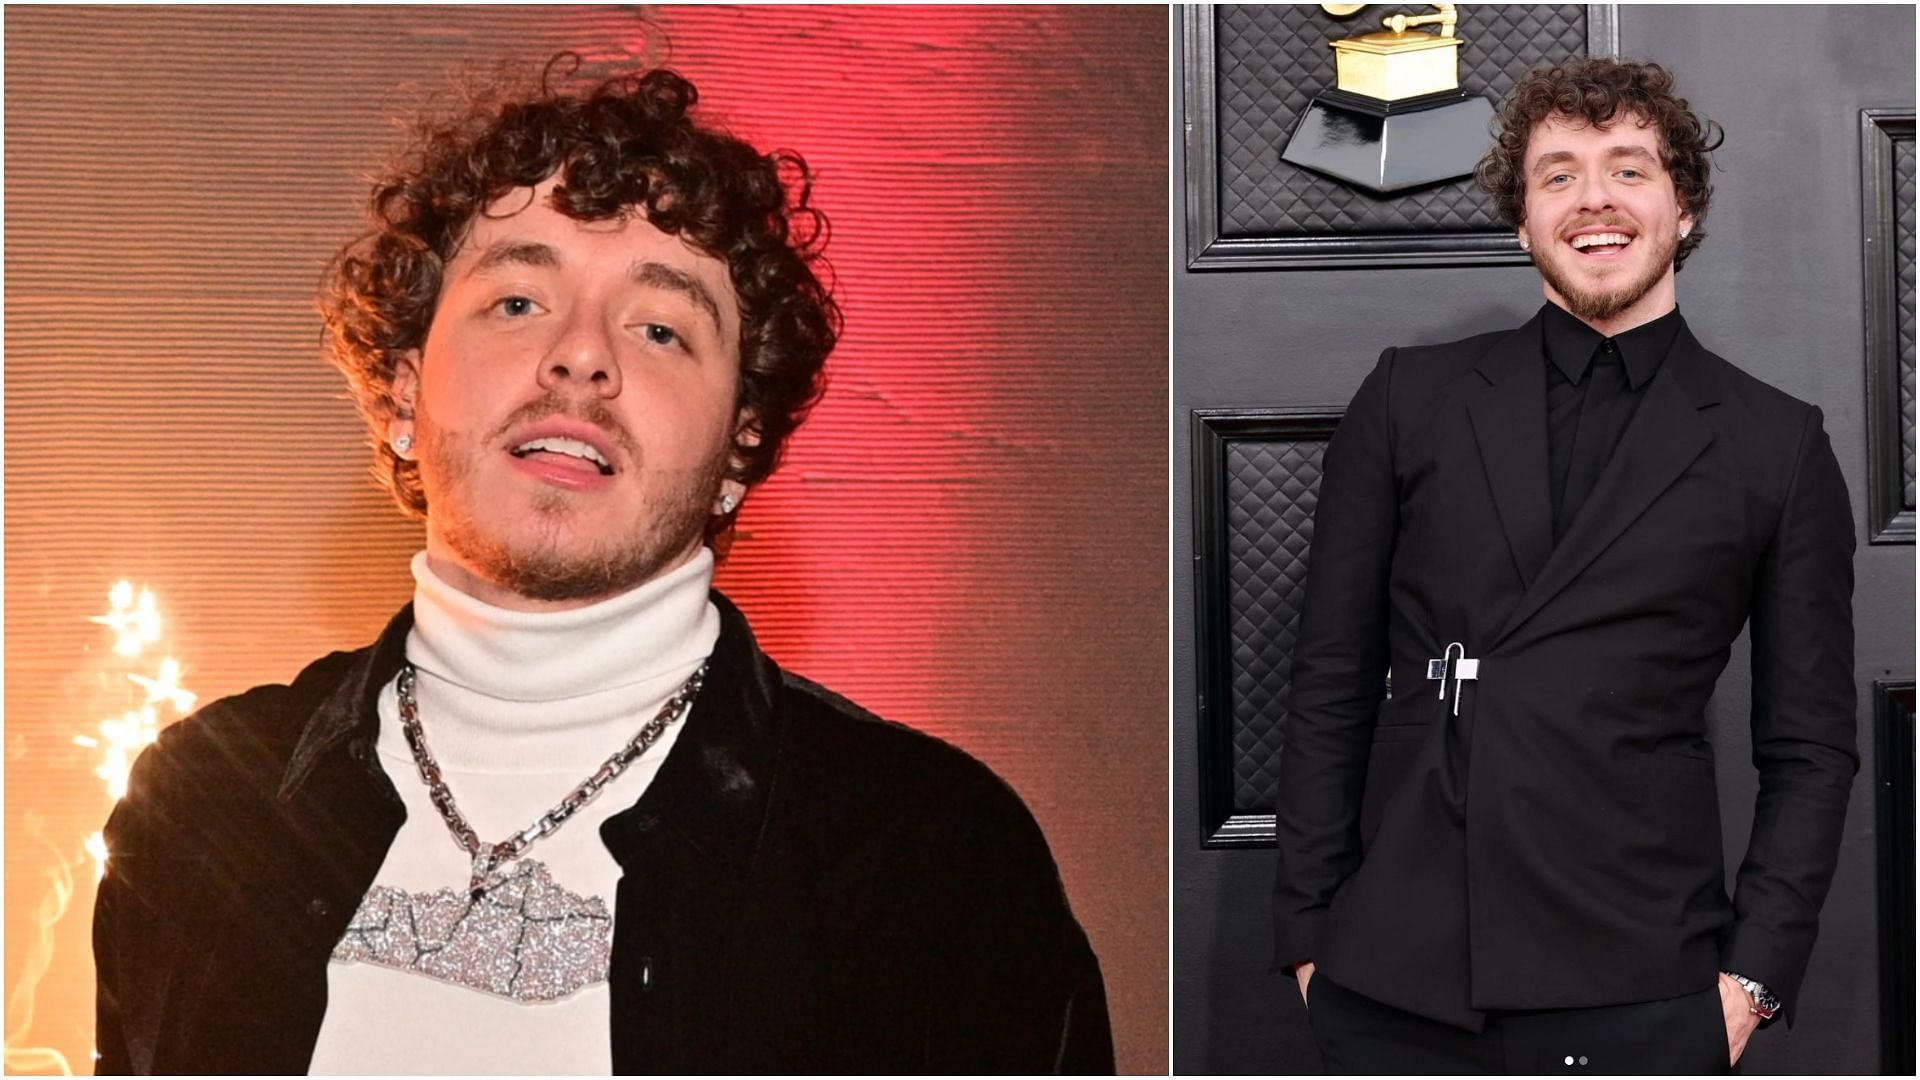 Singer and rapper Jack Harlow (Image via Prince Williams / Getty and Instagram / @jackharlow)